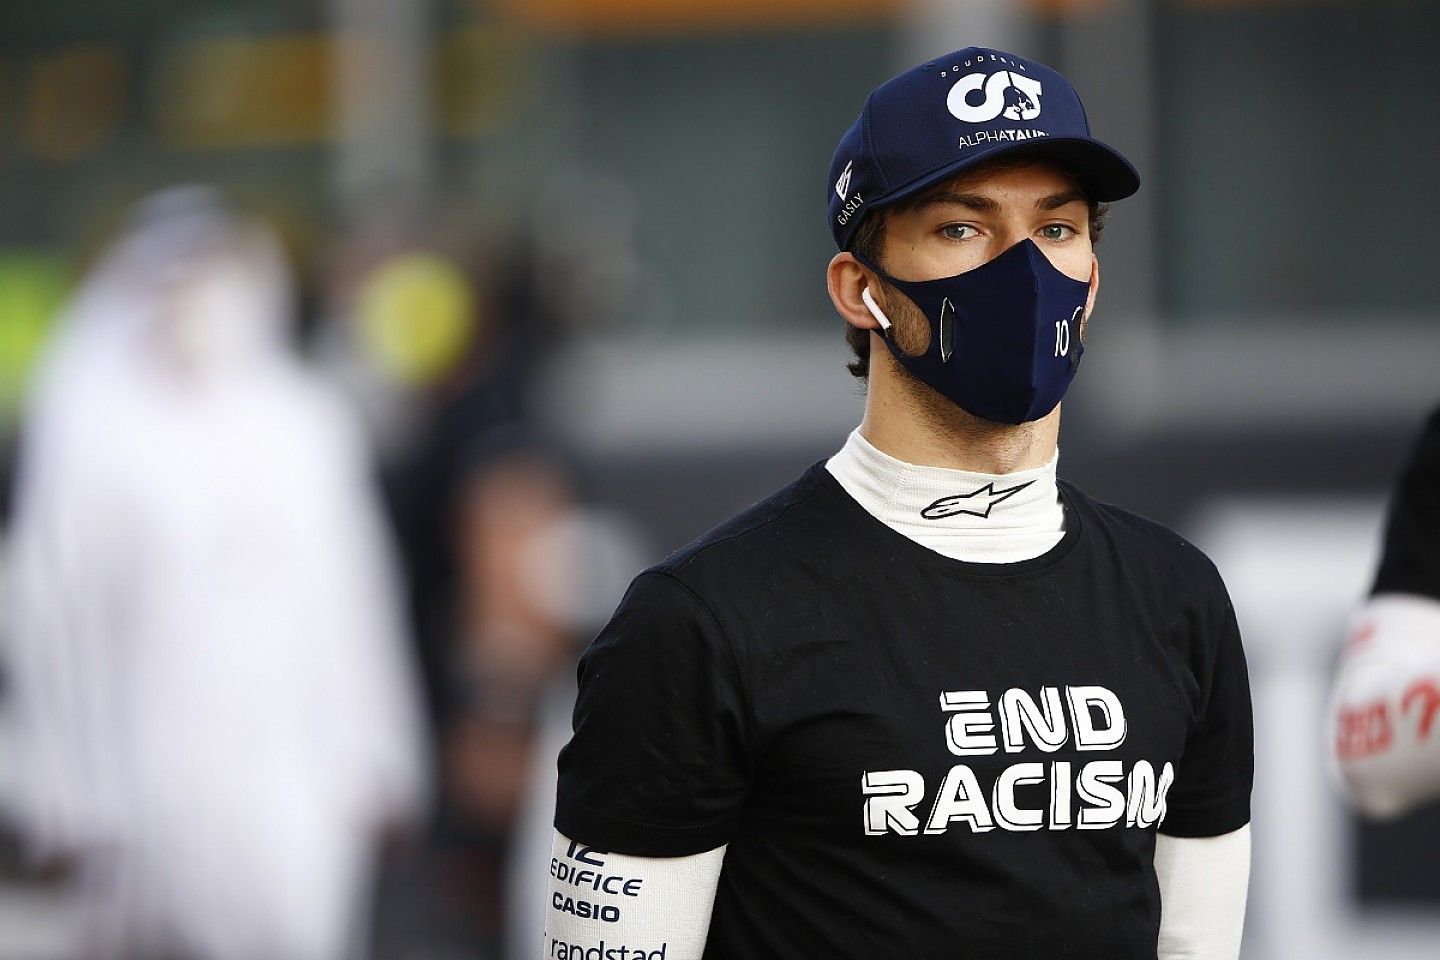 Tost doubts Red Bull would let Gasly leave AlphaTauri F1 team easily